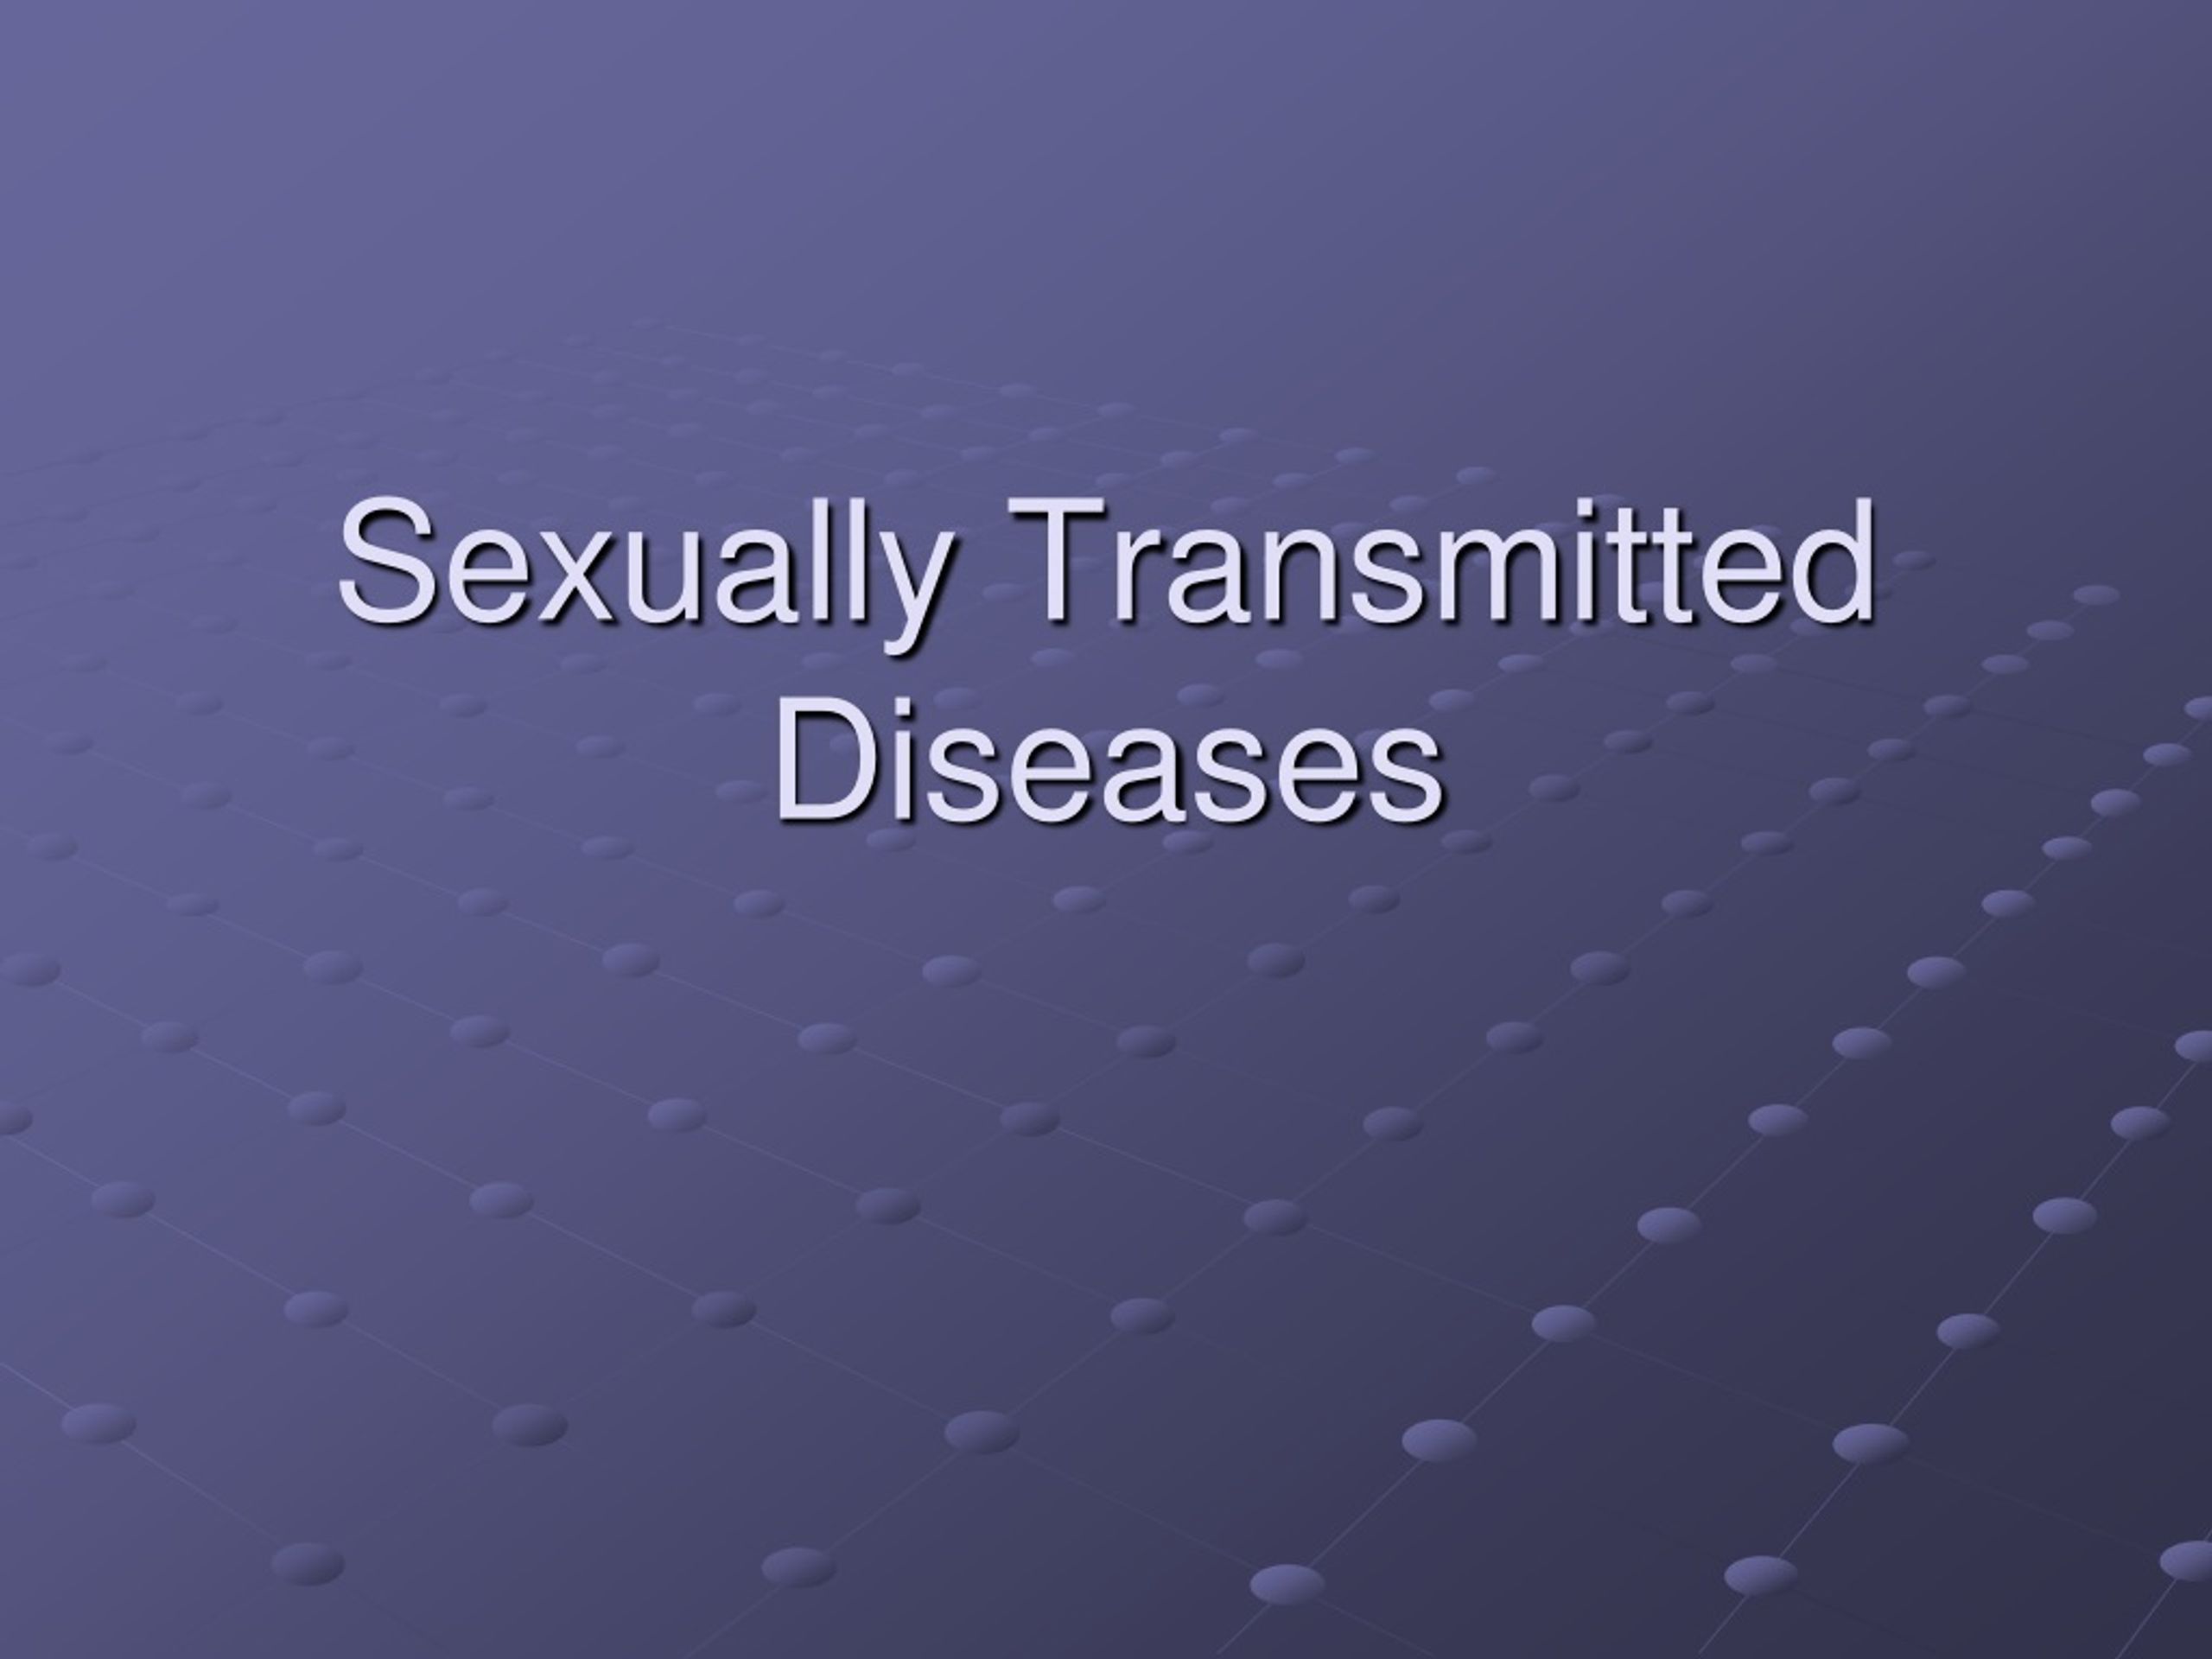 Ppt Sexually Transmitted Diseases Powerpoint Presentation Free Download Id8705723 4314